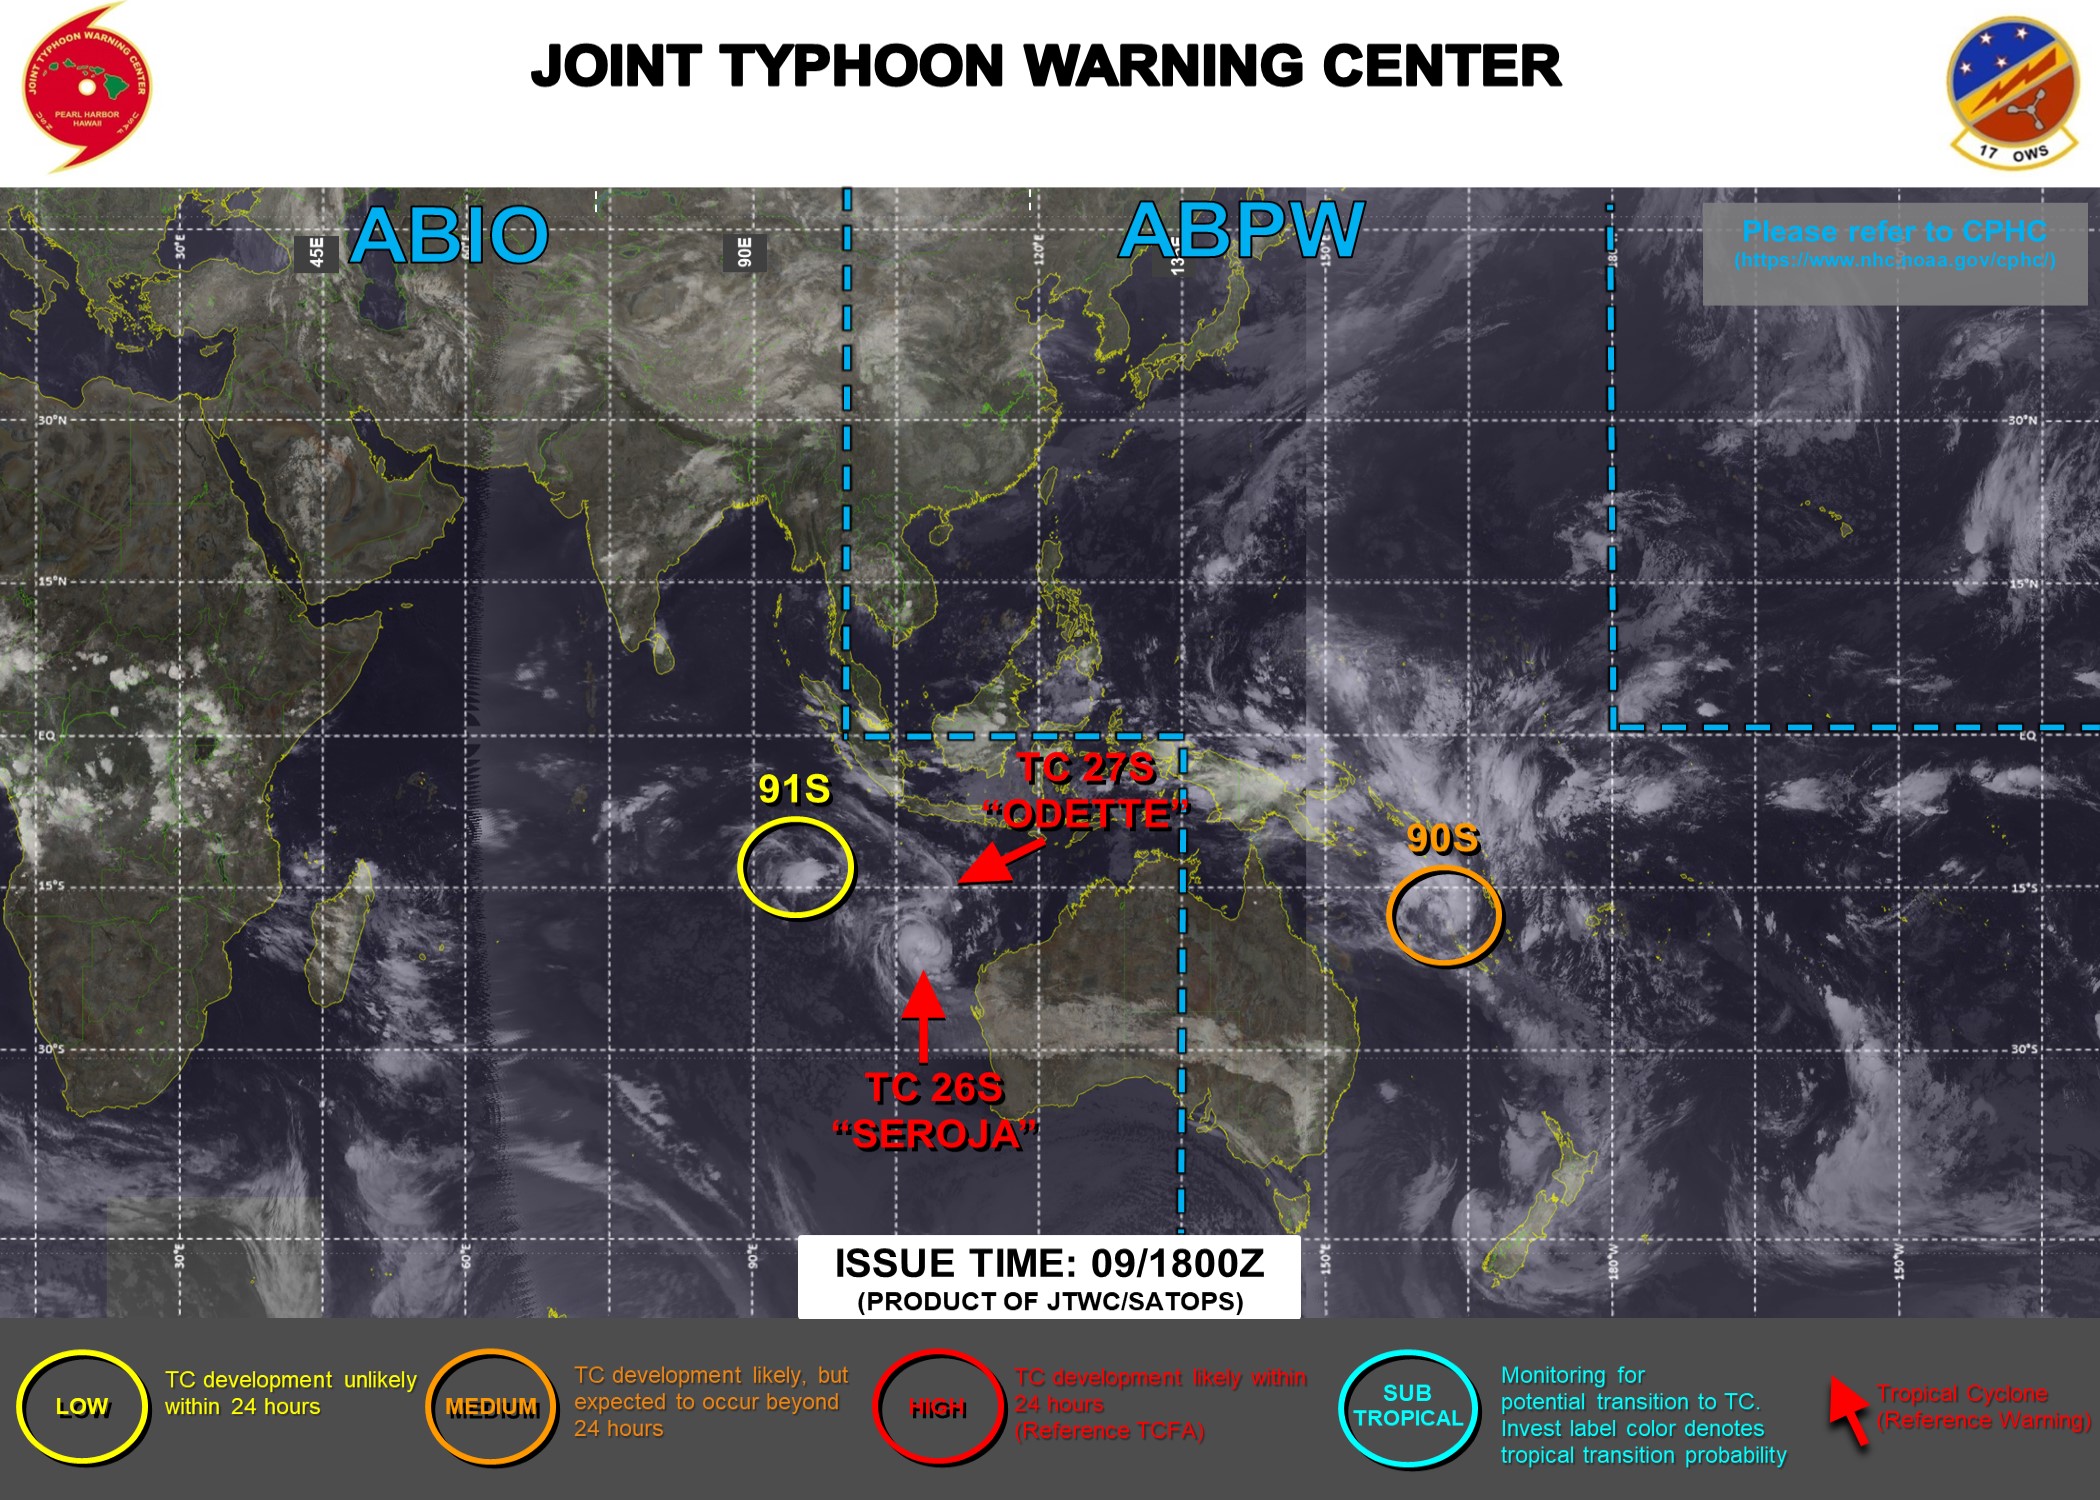 10/03UTC. THE JTWC IS ISSUING 6HOURLY WARNINGS ON TC 26S(SEROJA) AND TC 27S(ODETTE). INVEST 92P WAS UP-GRADED TO MEDIUM AT 09/1930UTC(MODERATE CHANCES OF REACHING 35KNOTS WITHIN 24H). 3 HOURLY SATELLITE BULLETINS ARE ISSUED FOR THE 4 SYSTEMS.